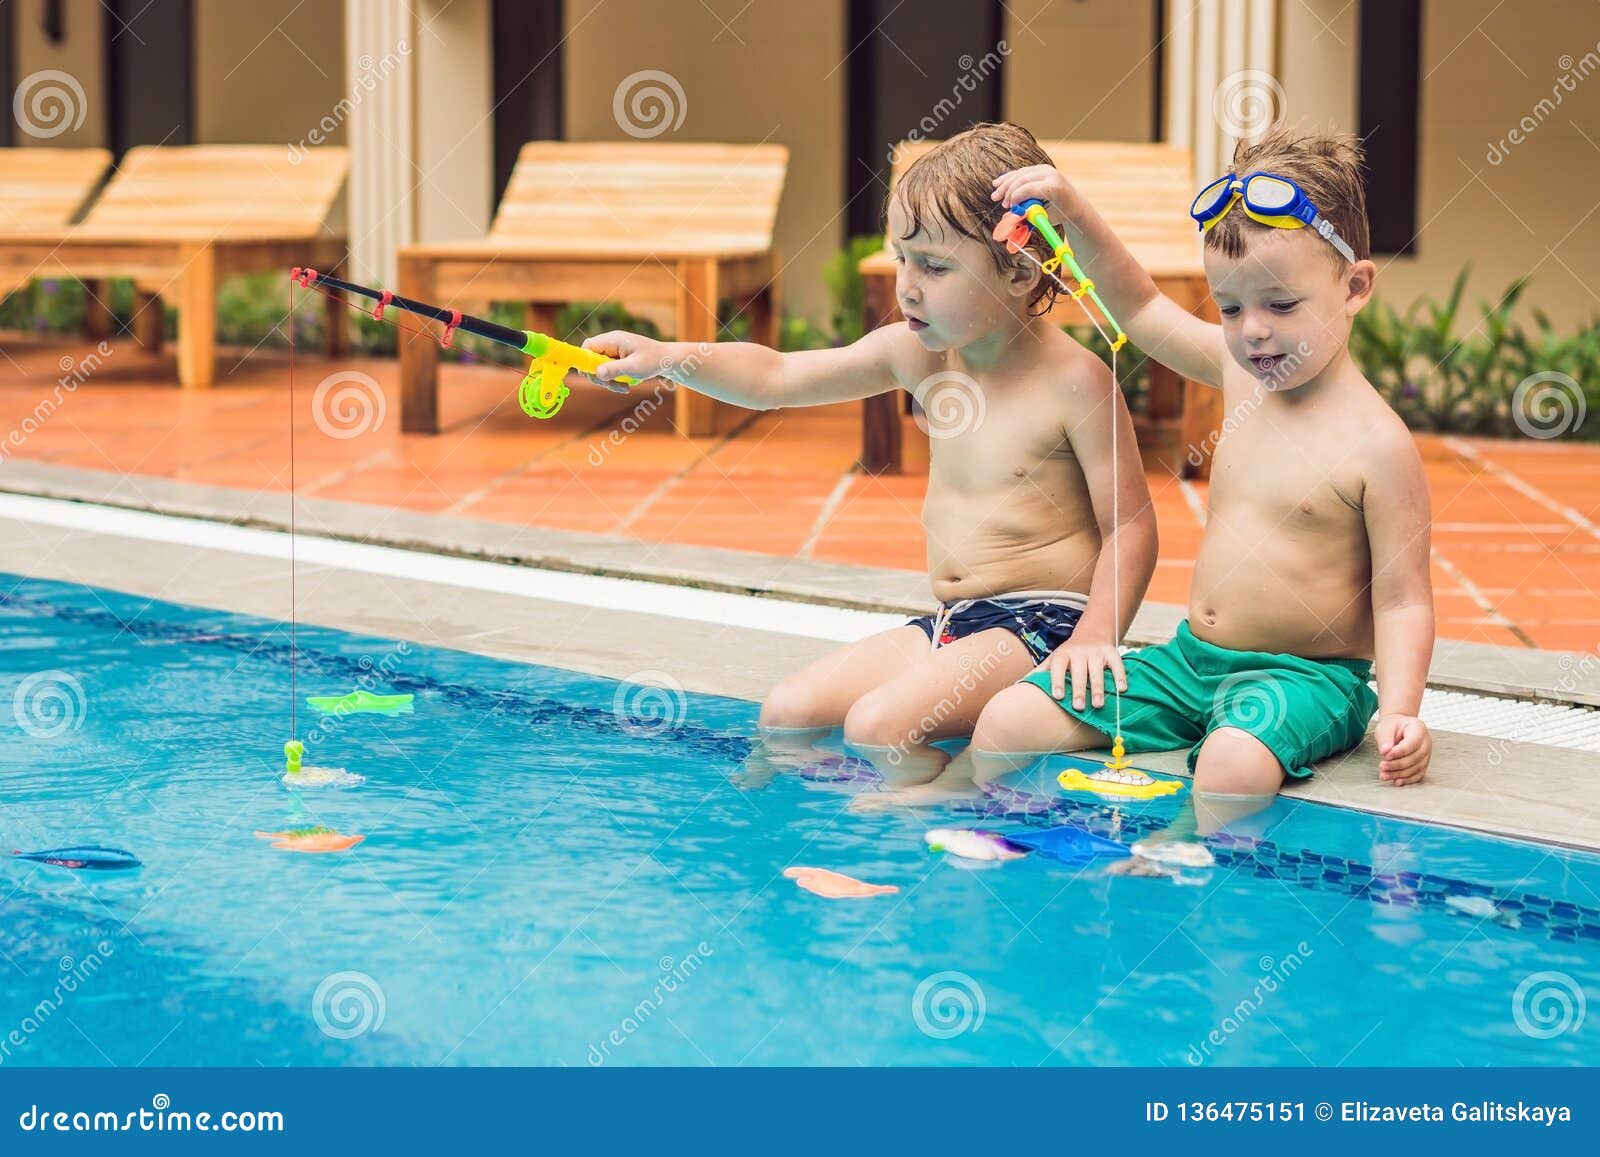 https://thumbs.dreamstime.com/z/two-little-cute-boy-catching-toy-fish-pool-136475151.jpg